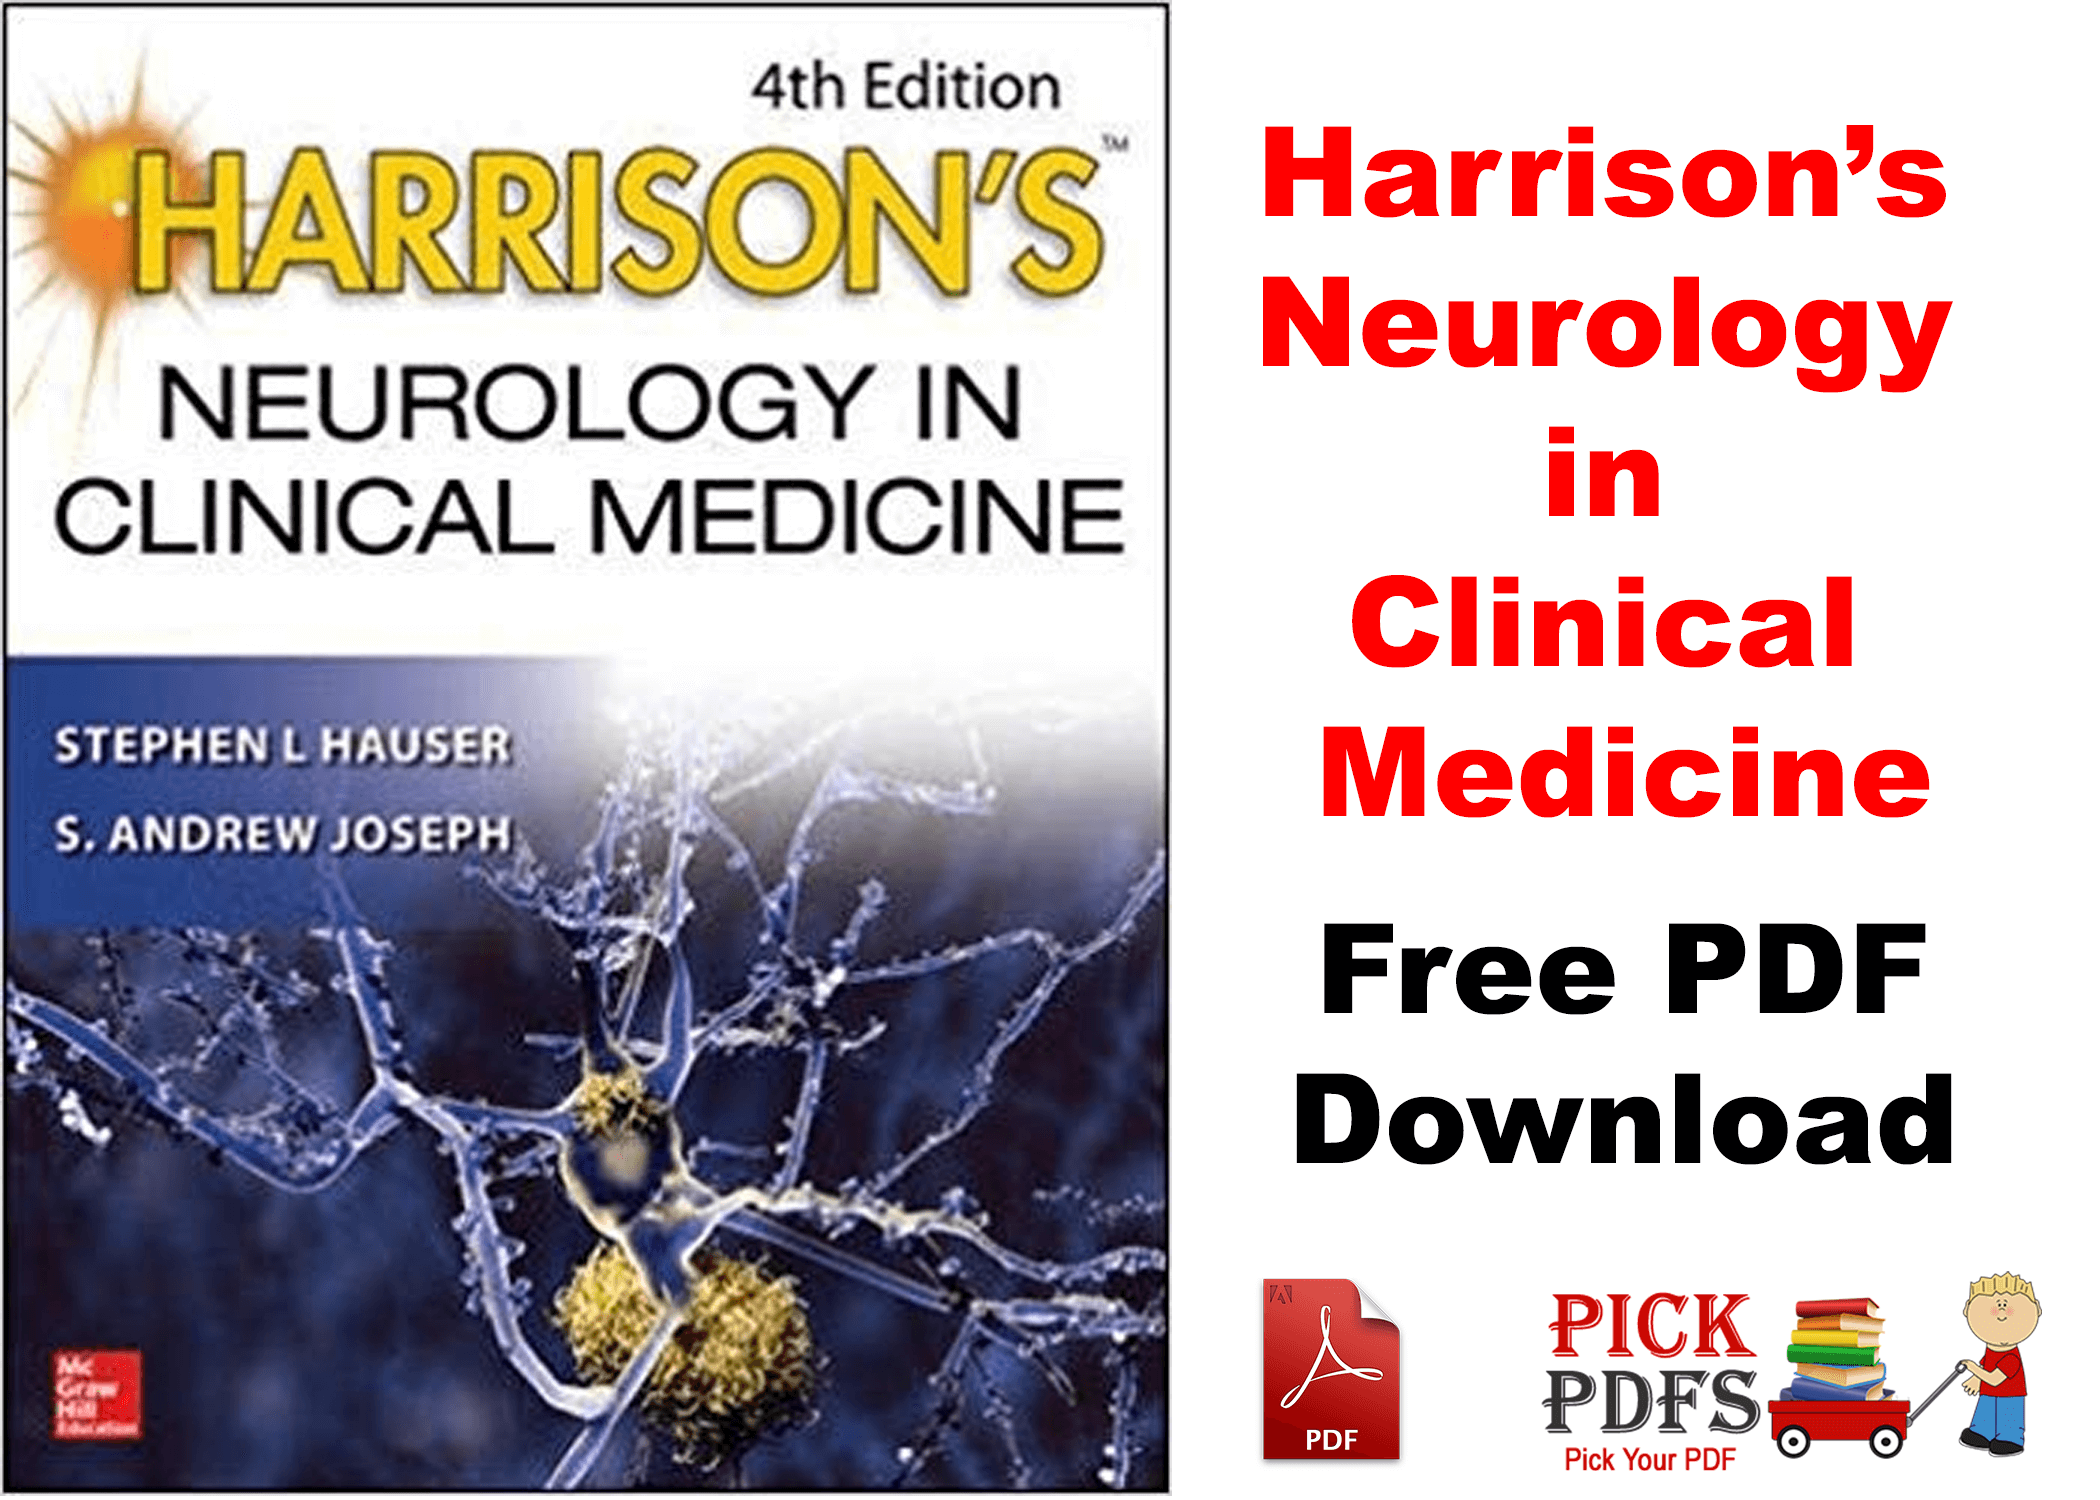 https://pickpdfs.com/harrisons-neurology-in-clinical-medicine-free-pdf-download-4th-edition/